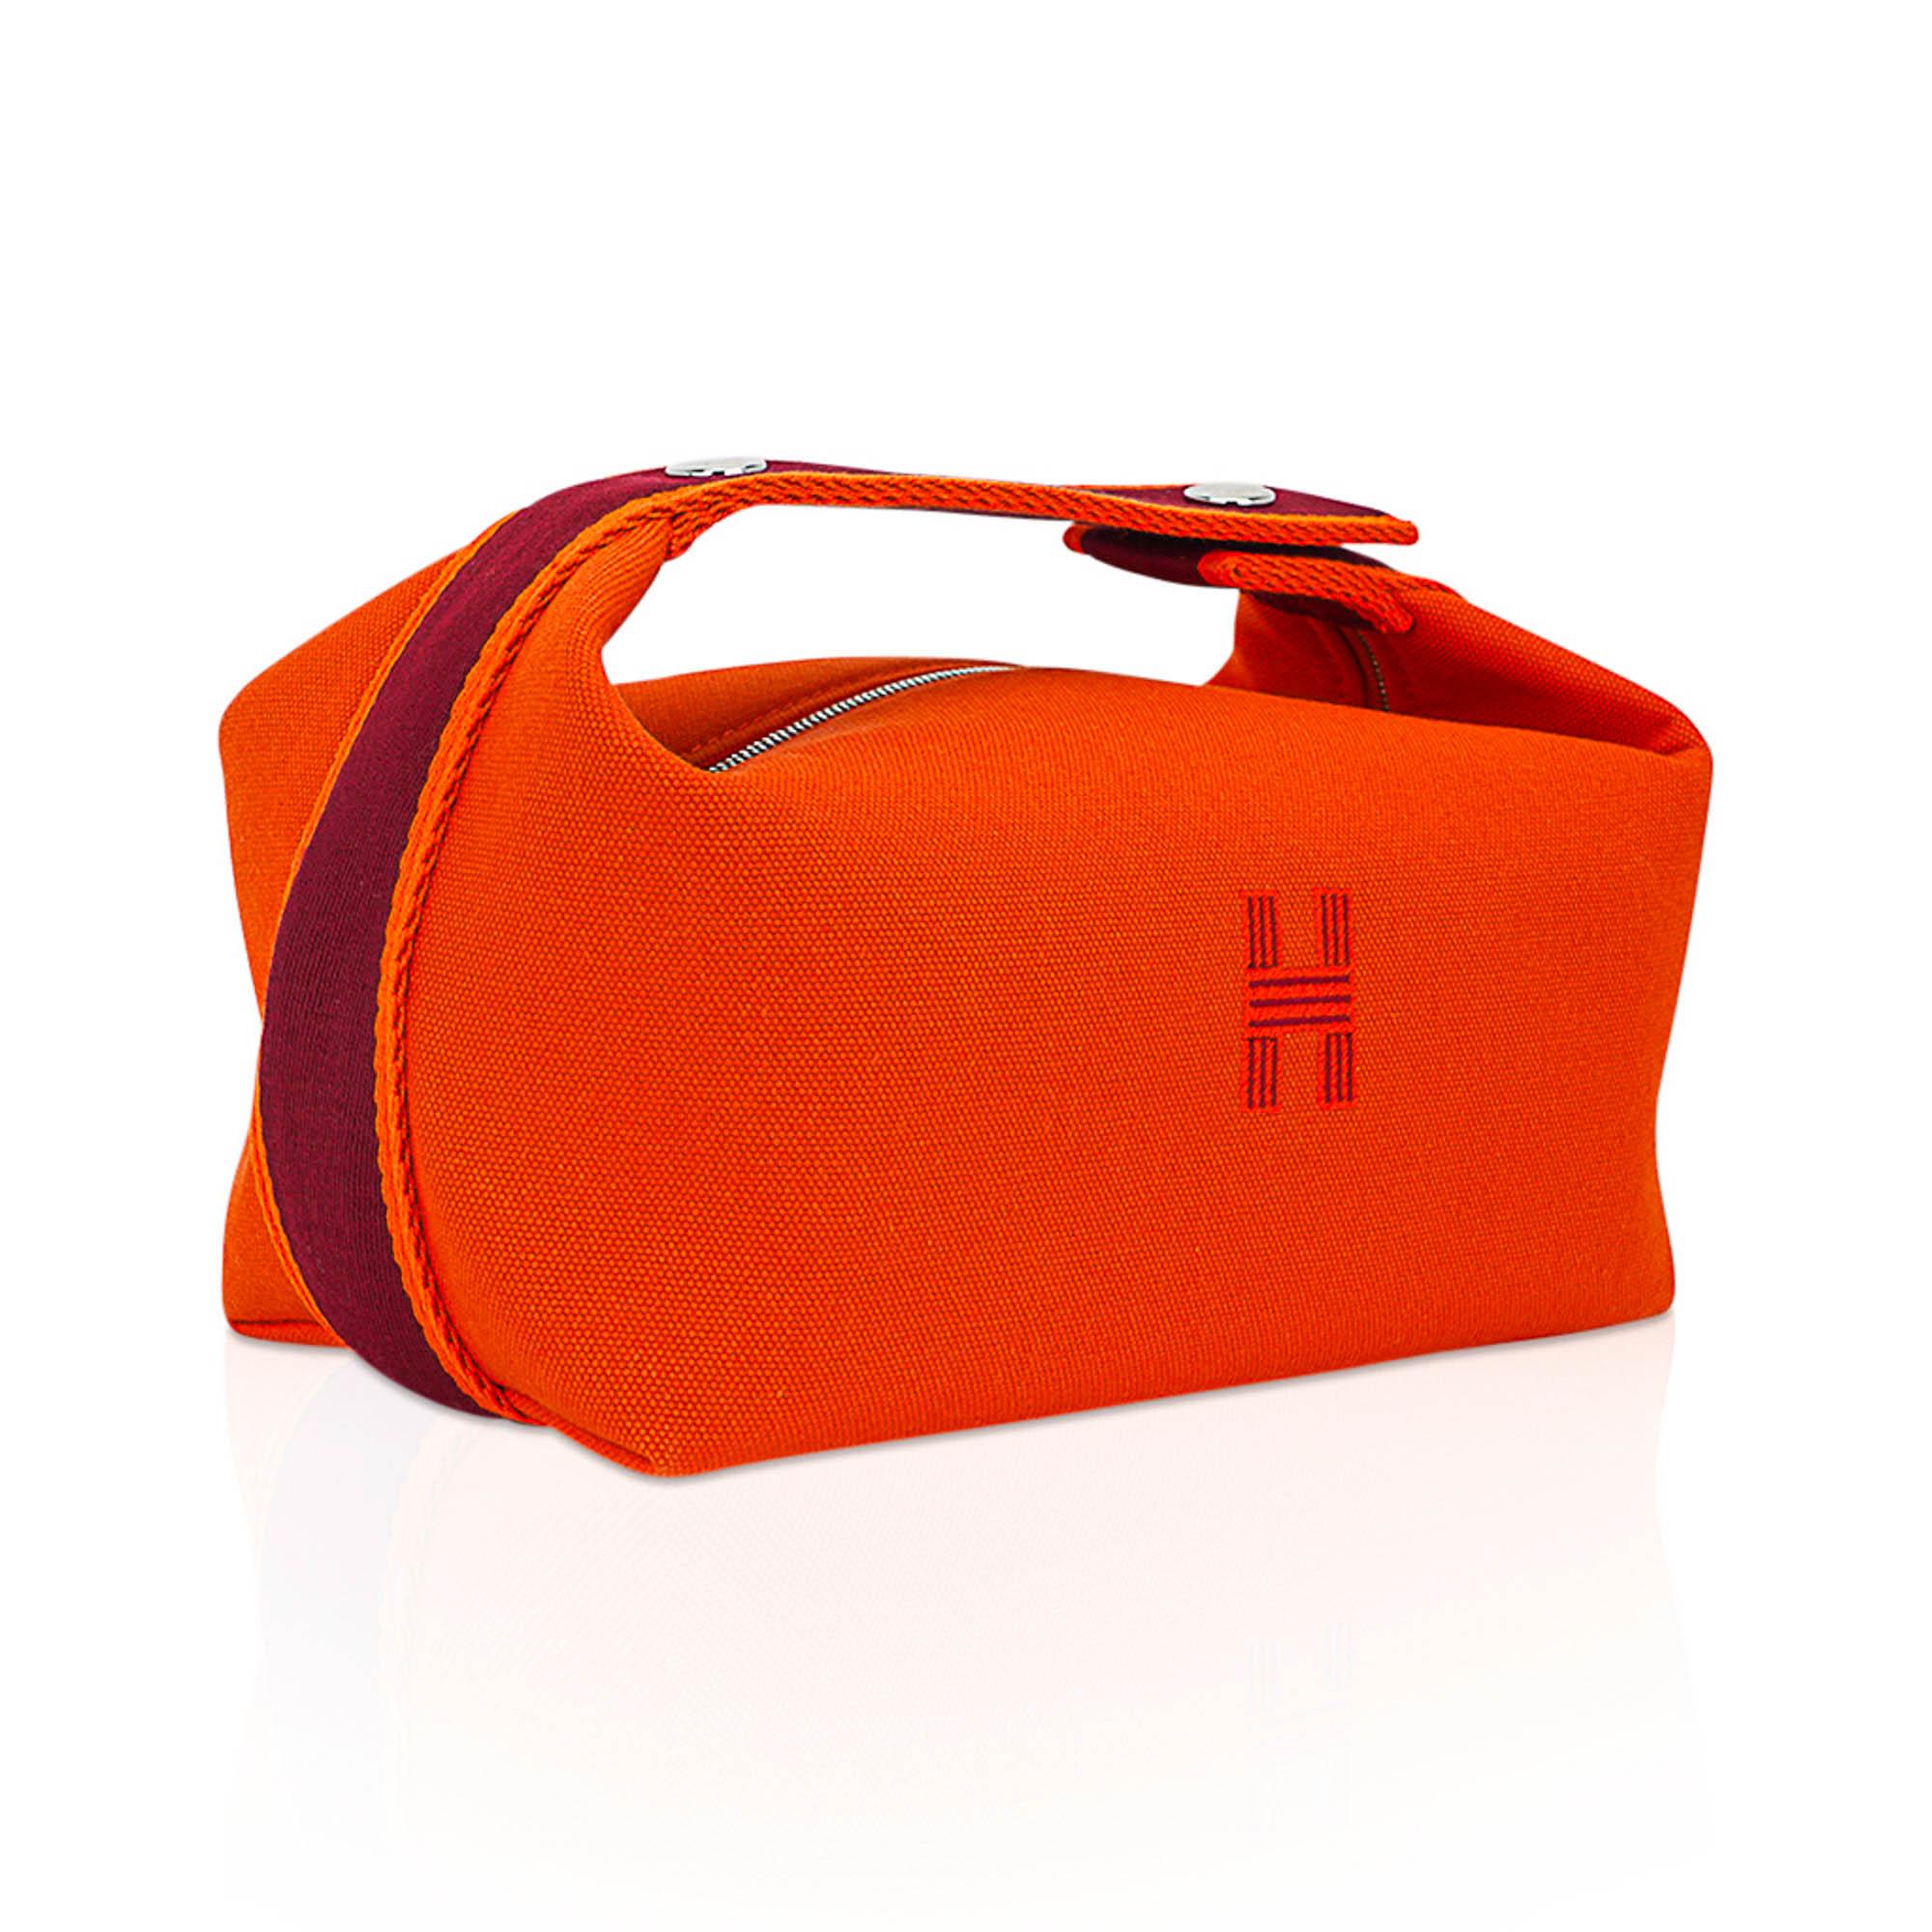 Mightychic offers an Hermes Bride-A-Brac Pencil Case small model featured in Orange H Plume cotton canvas.
The Trousse de Toilette has an embroidered H on the front.
Top strap, inspired by a Gianpaolo Pagni drawing, features an woven Rouge zig